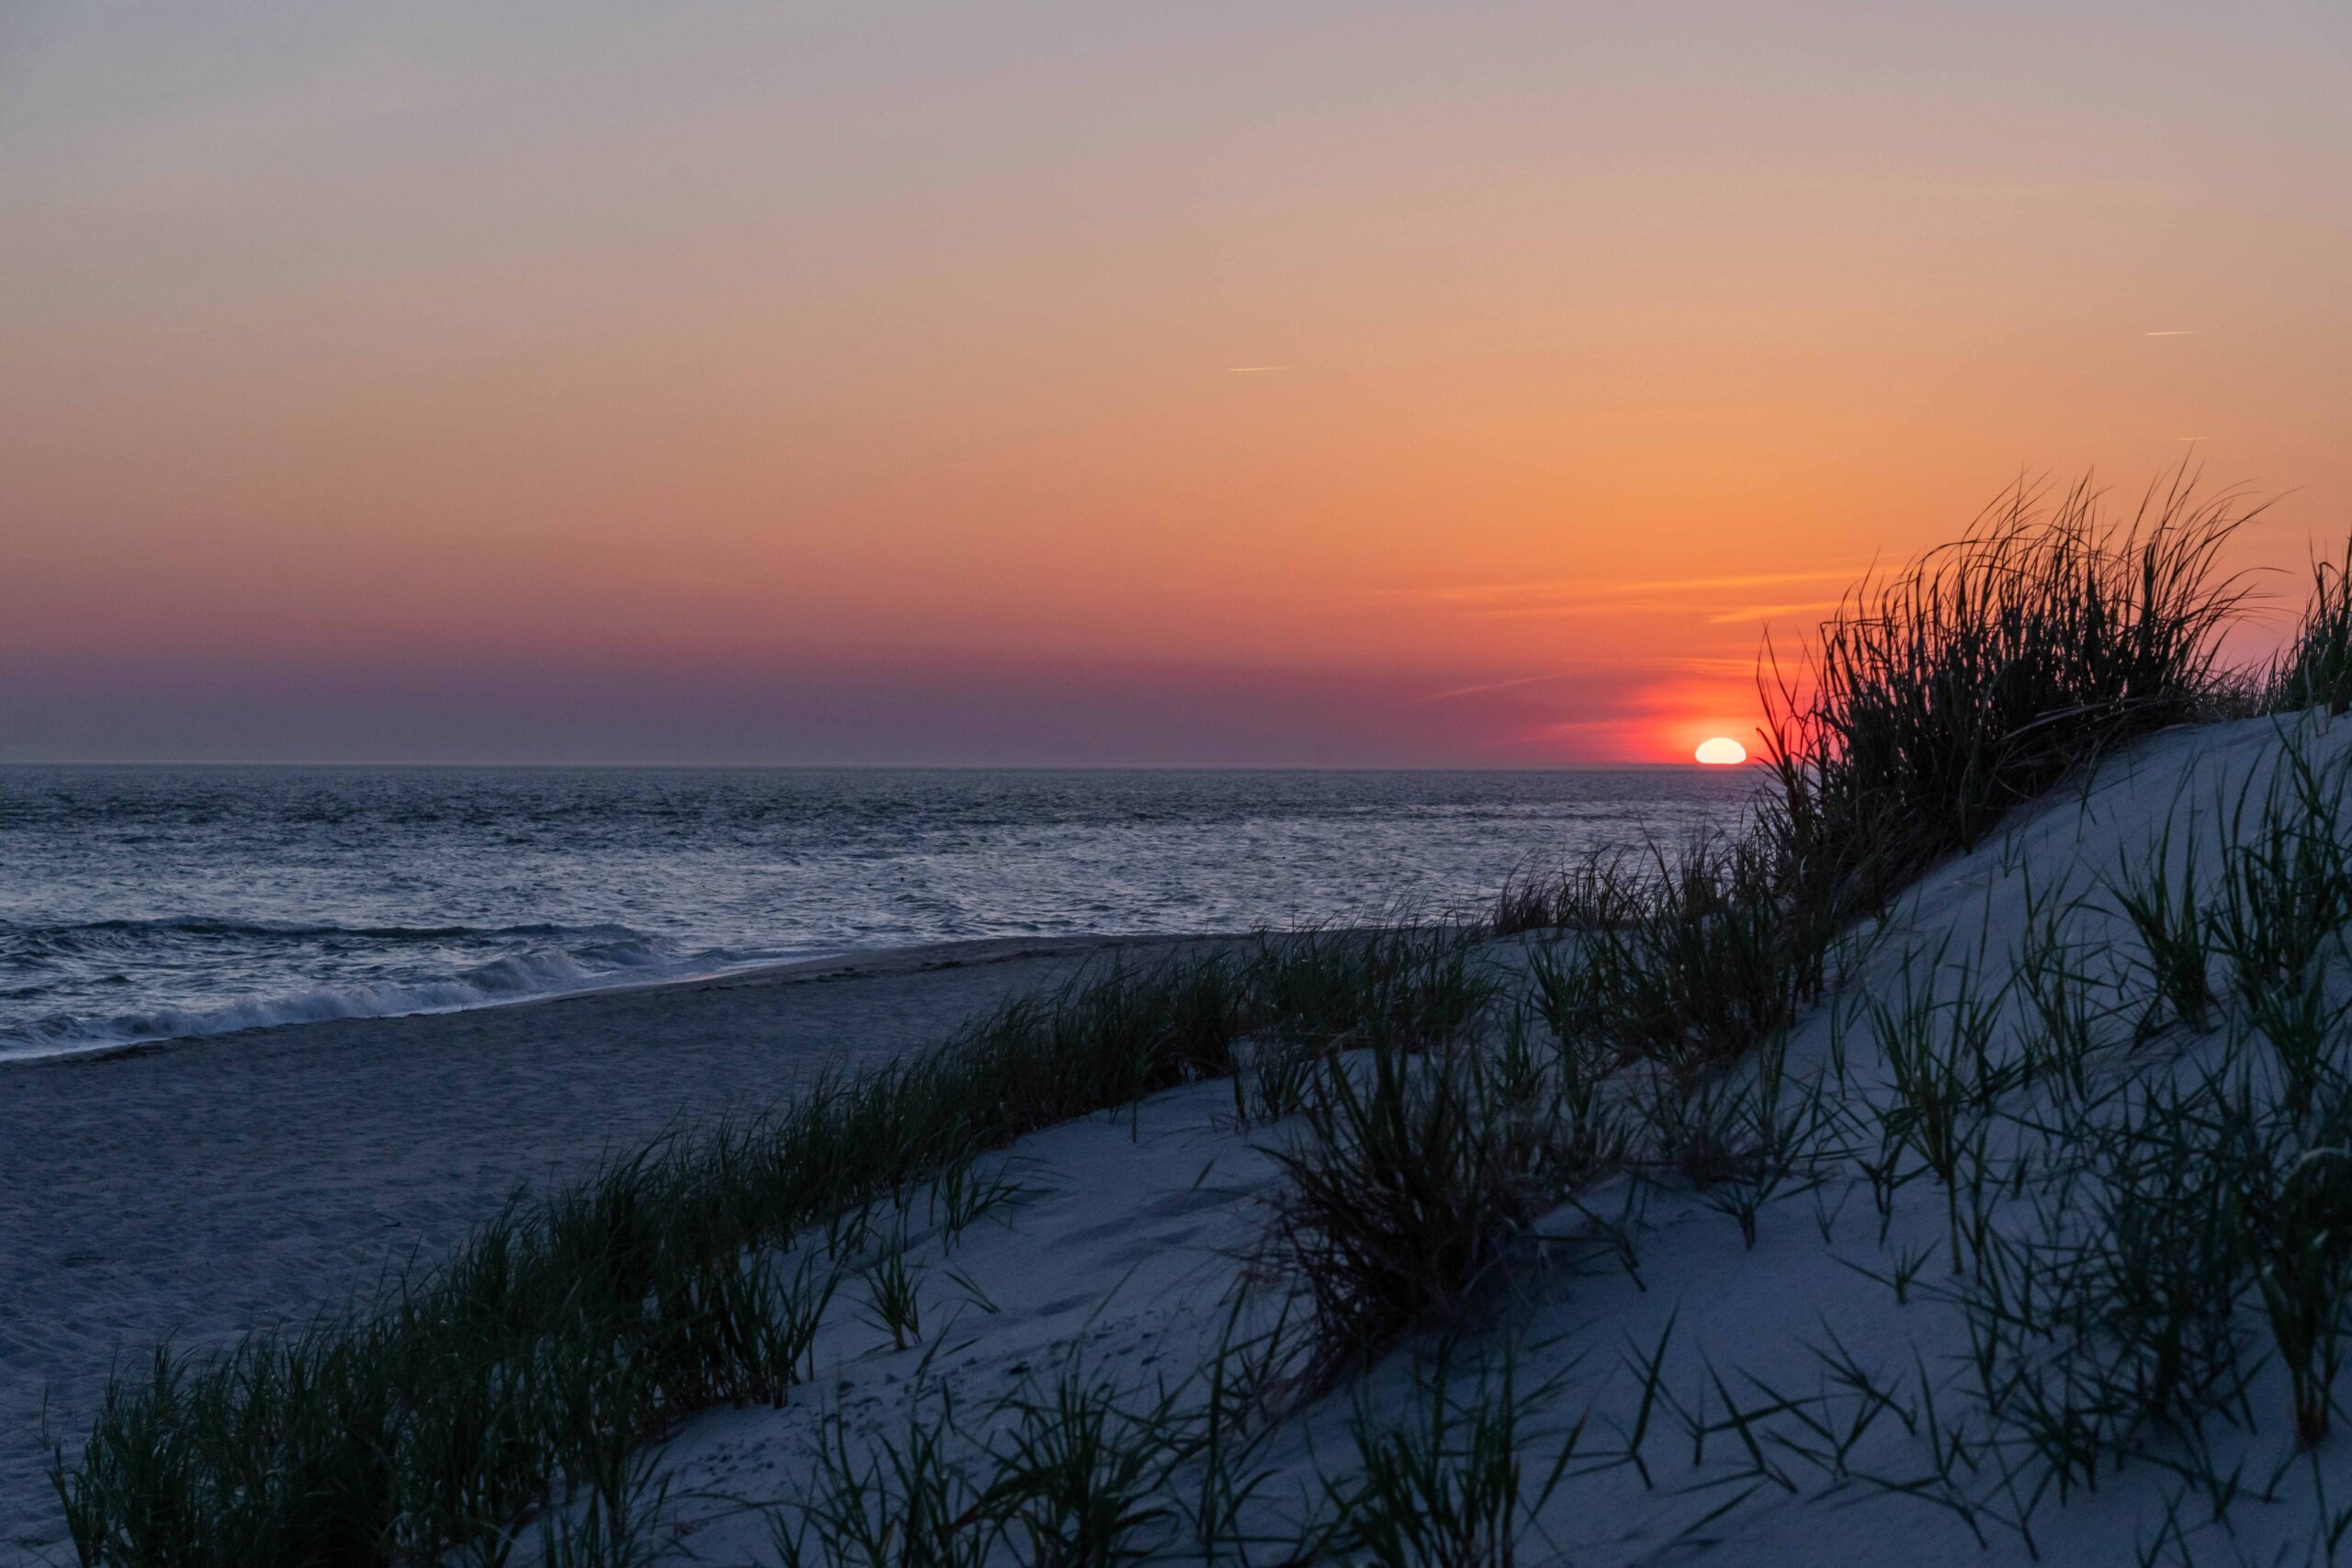 A pink sunset at the horizon of the ocean behind beach dunes 